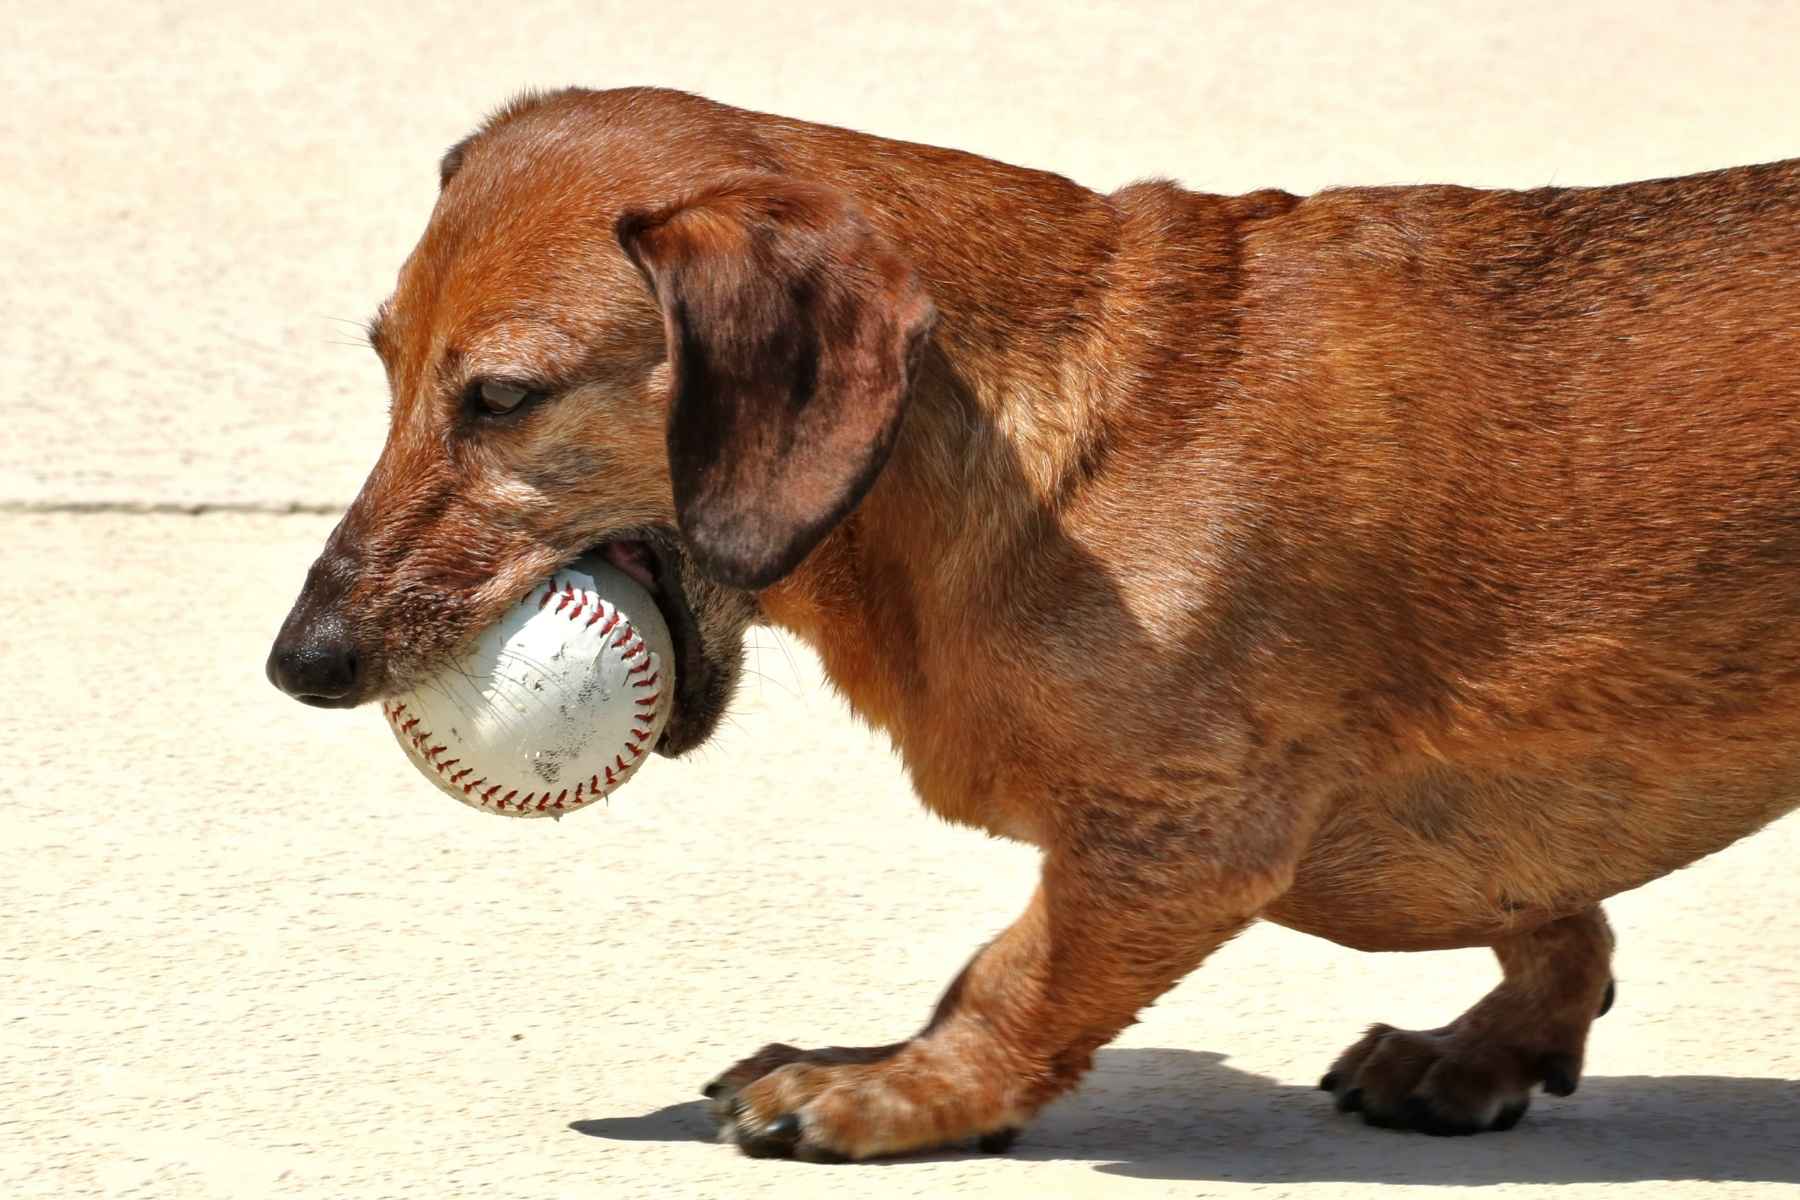 Brown dog chewing on a baseball